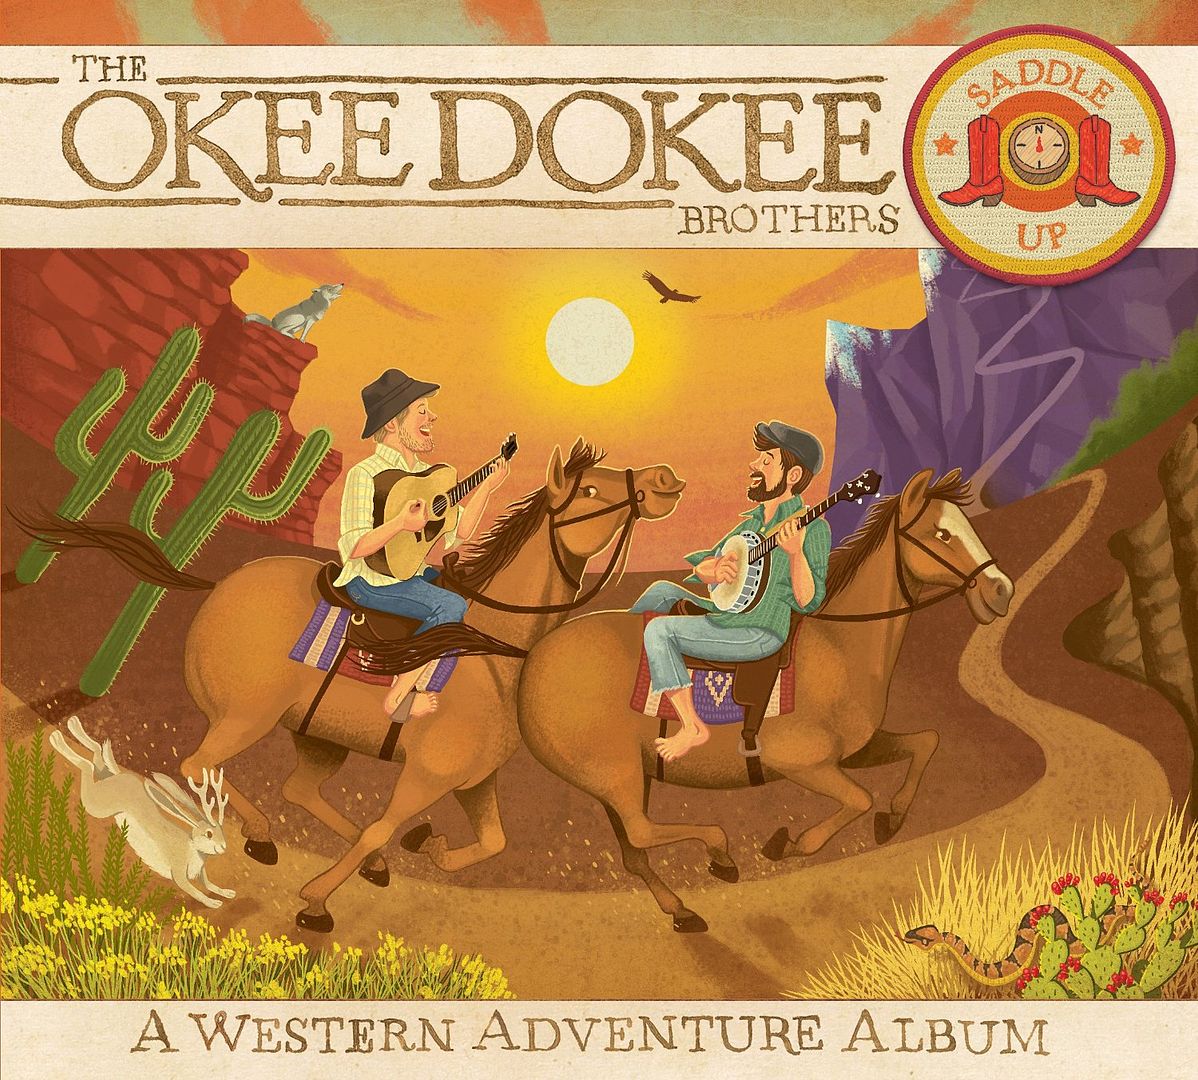 Screen-free road trip fun: Okee Dokee Brothers and other great kids' music for sing-along time